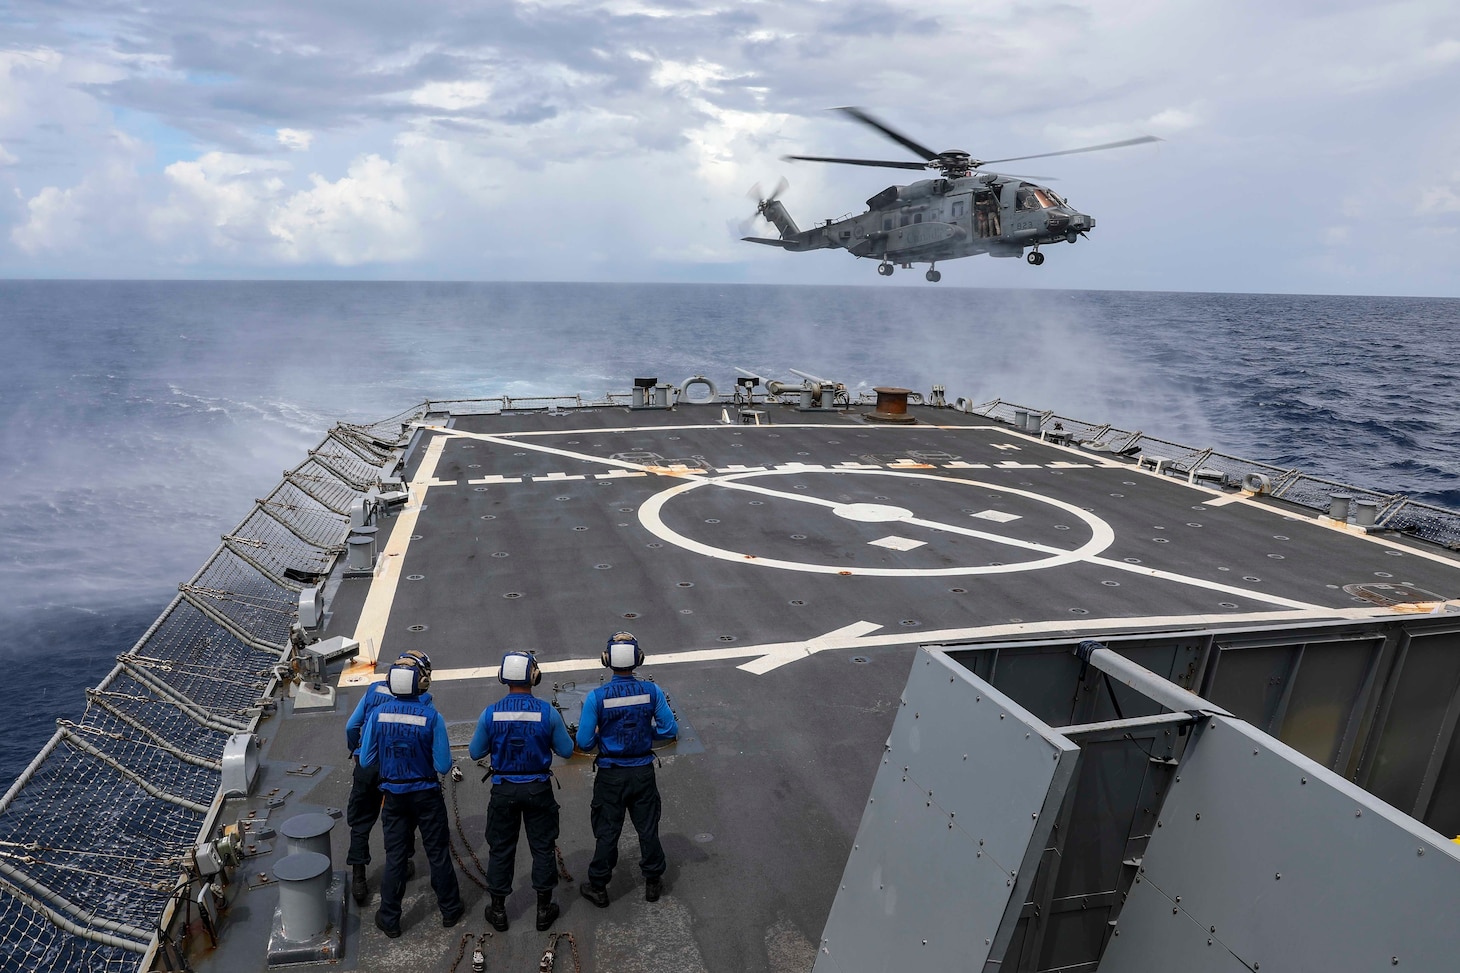 SOUTH CHINA SEA (Oct. 5, 2022) A Canadian Sikorsky CH-148 Cyclone helicopter attached to the Royal Canadian Navy Halifax-class frigate HMCS Winnipeg (FFH 338) approaches the flight deck aboard Arleigh Burke-class guided-missile destroyer USS Higgins (DDG 76) while conducting multi-lateral operations in the South China Sea, Oct. 5. The United States, with Japan Maritime Self Defense Force and Royal Canadian Navy are participating in multi-lateral exercises in the South China Sea in support of the Royal Australian Navy’s regional presence deployment. Exercises like this reassure our allies and partners of our combined commitment to maintaining a free and open Indo-Pacific. (U.S. Navy photo by Mass Communication Specialist 1st Class Donavan K. Patubo)